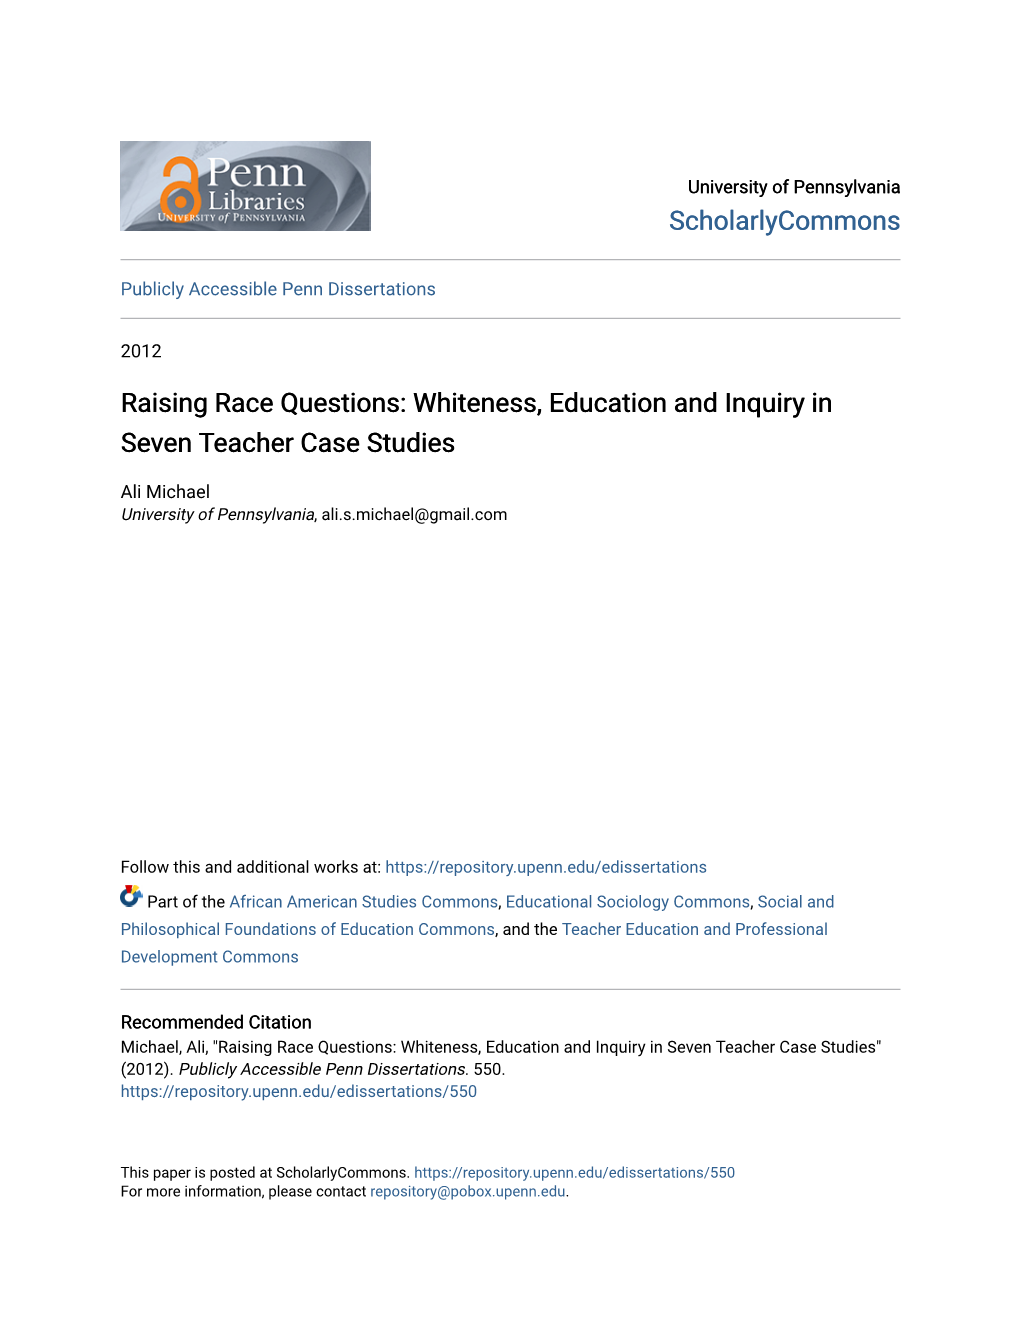 Raising Race Questions: Whiteness, Education and Inquiry in Seven Teacher Case Studies